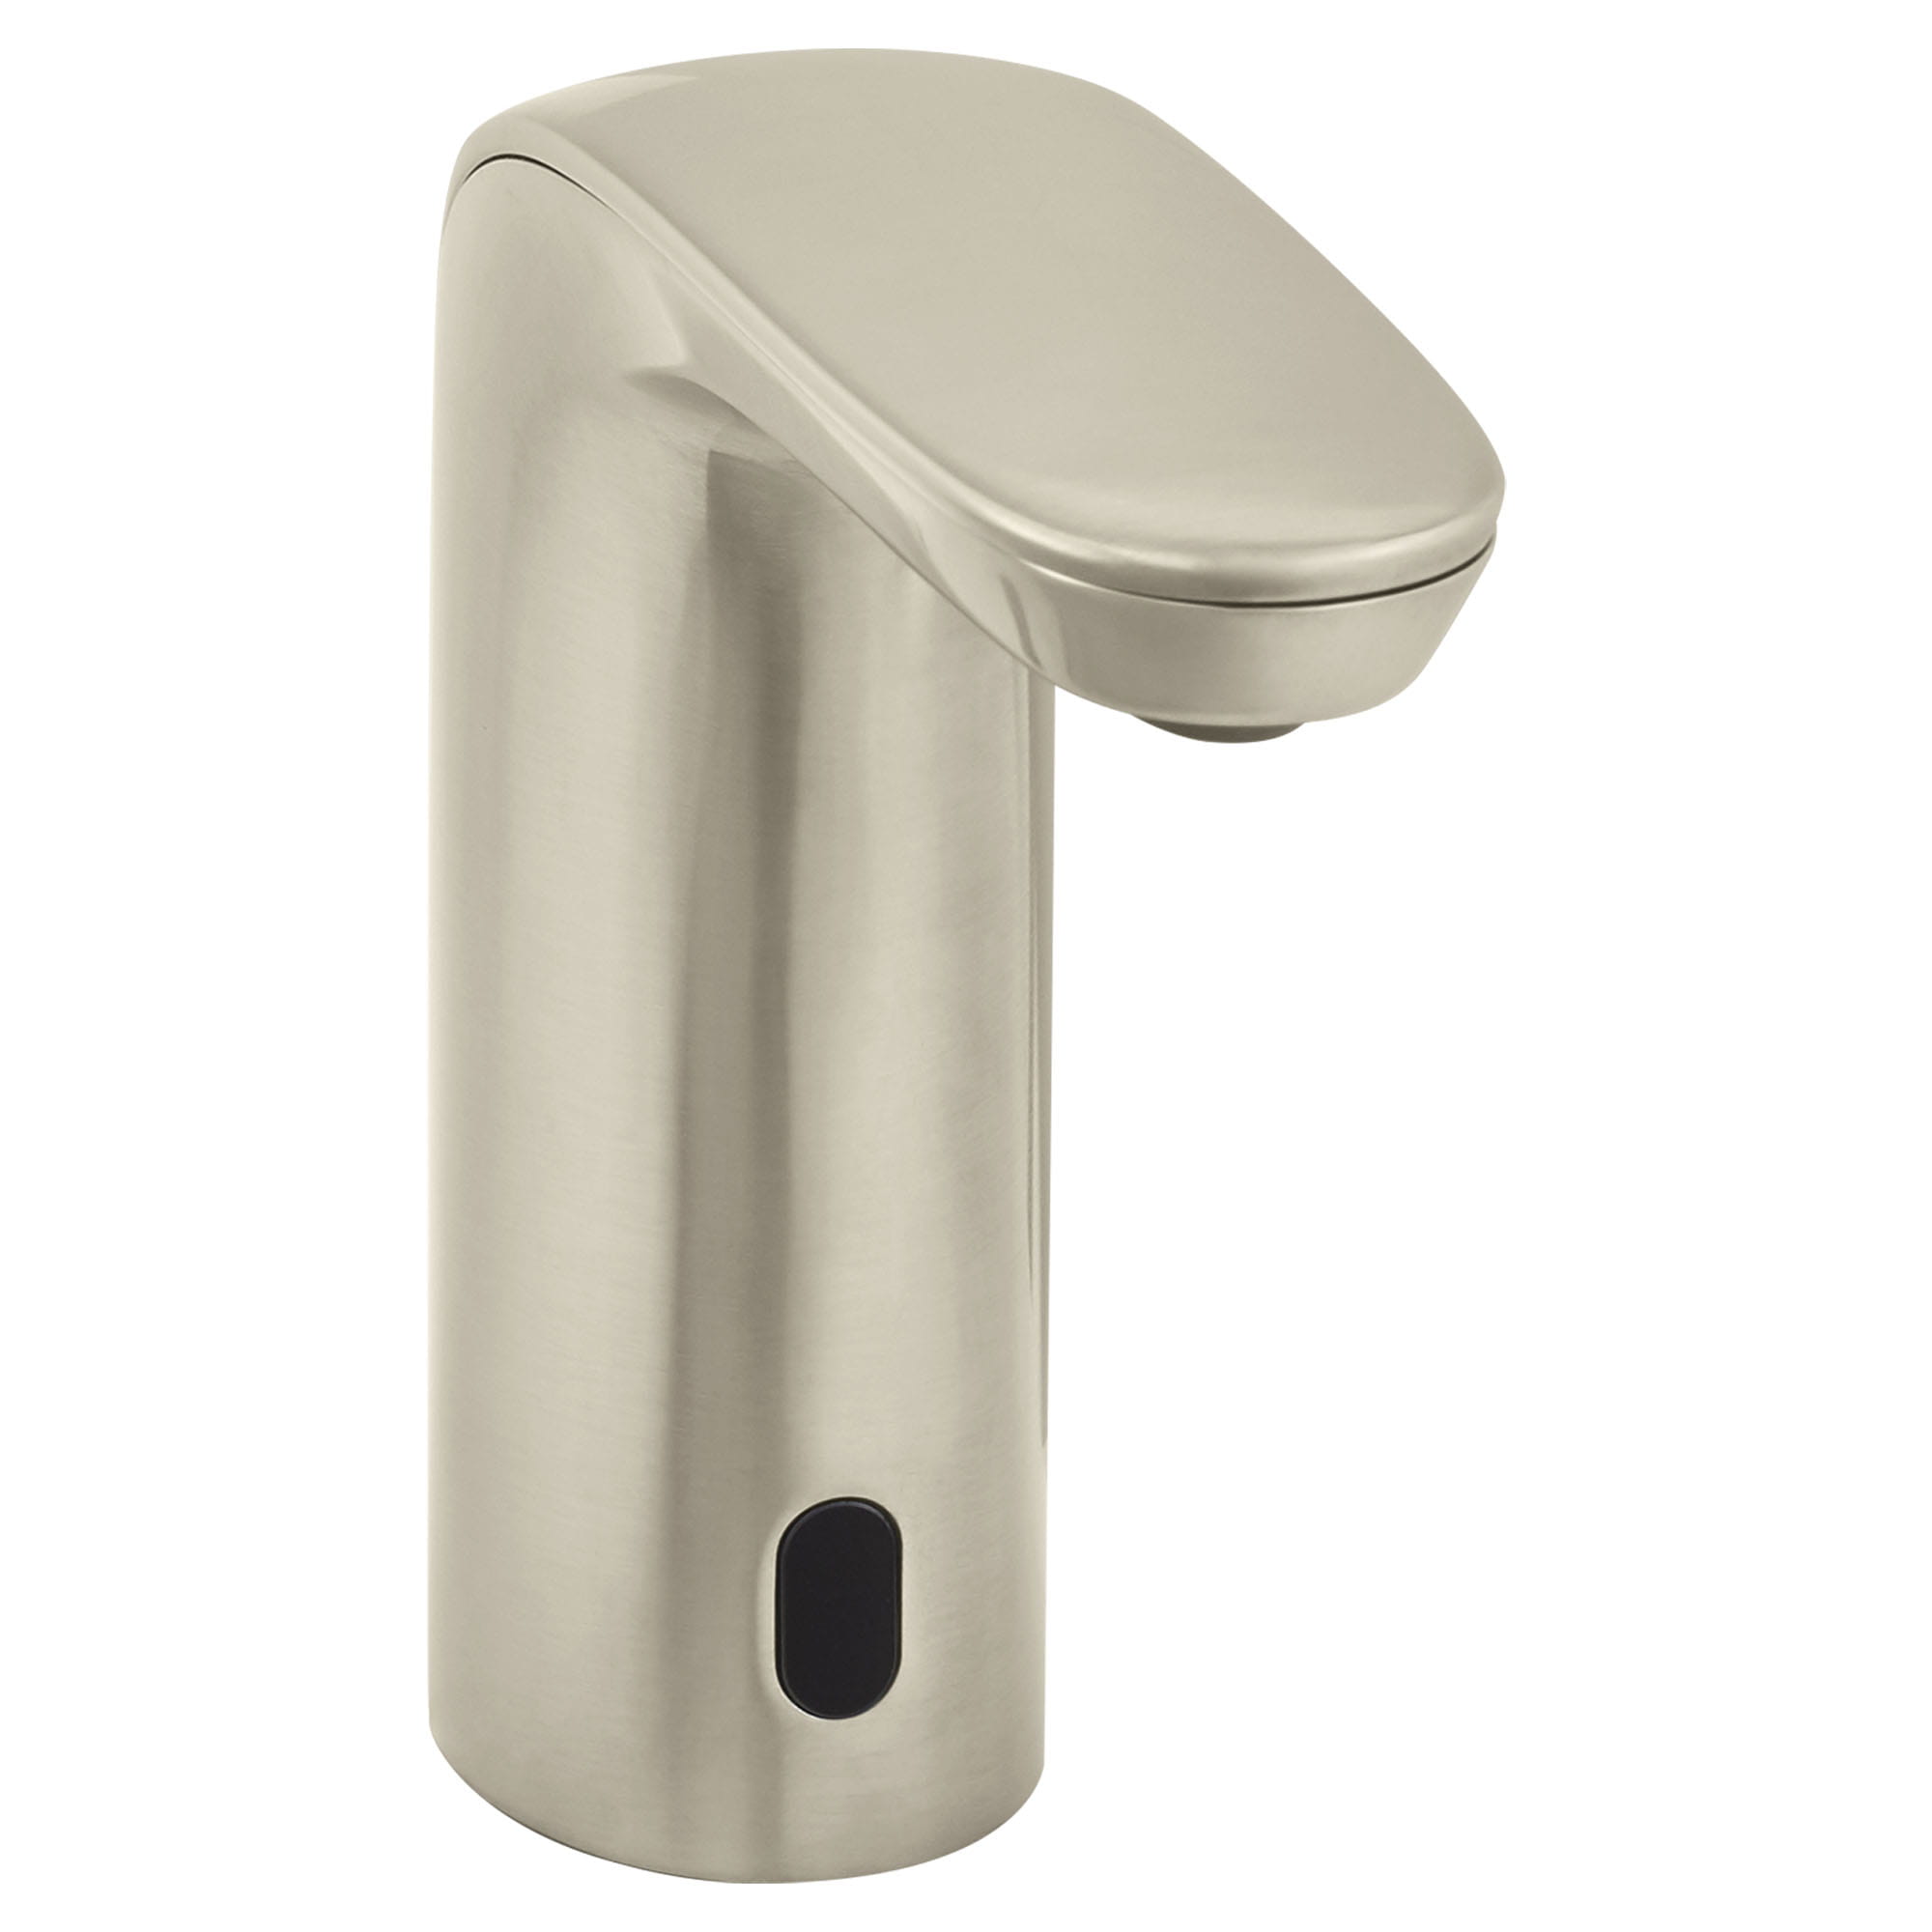 NextGen Selectronic Touchless Faucet Battery Powered 05 gpm 19 Lpm   BRUSHED NICKEL